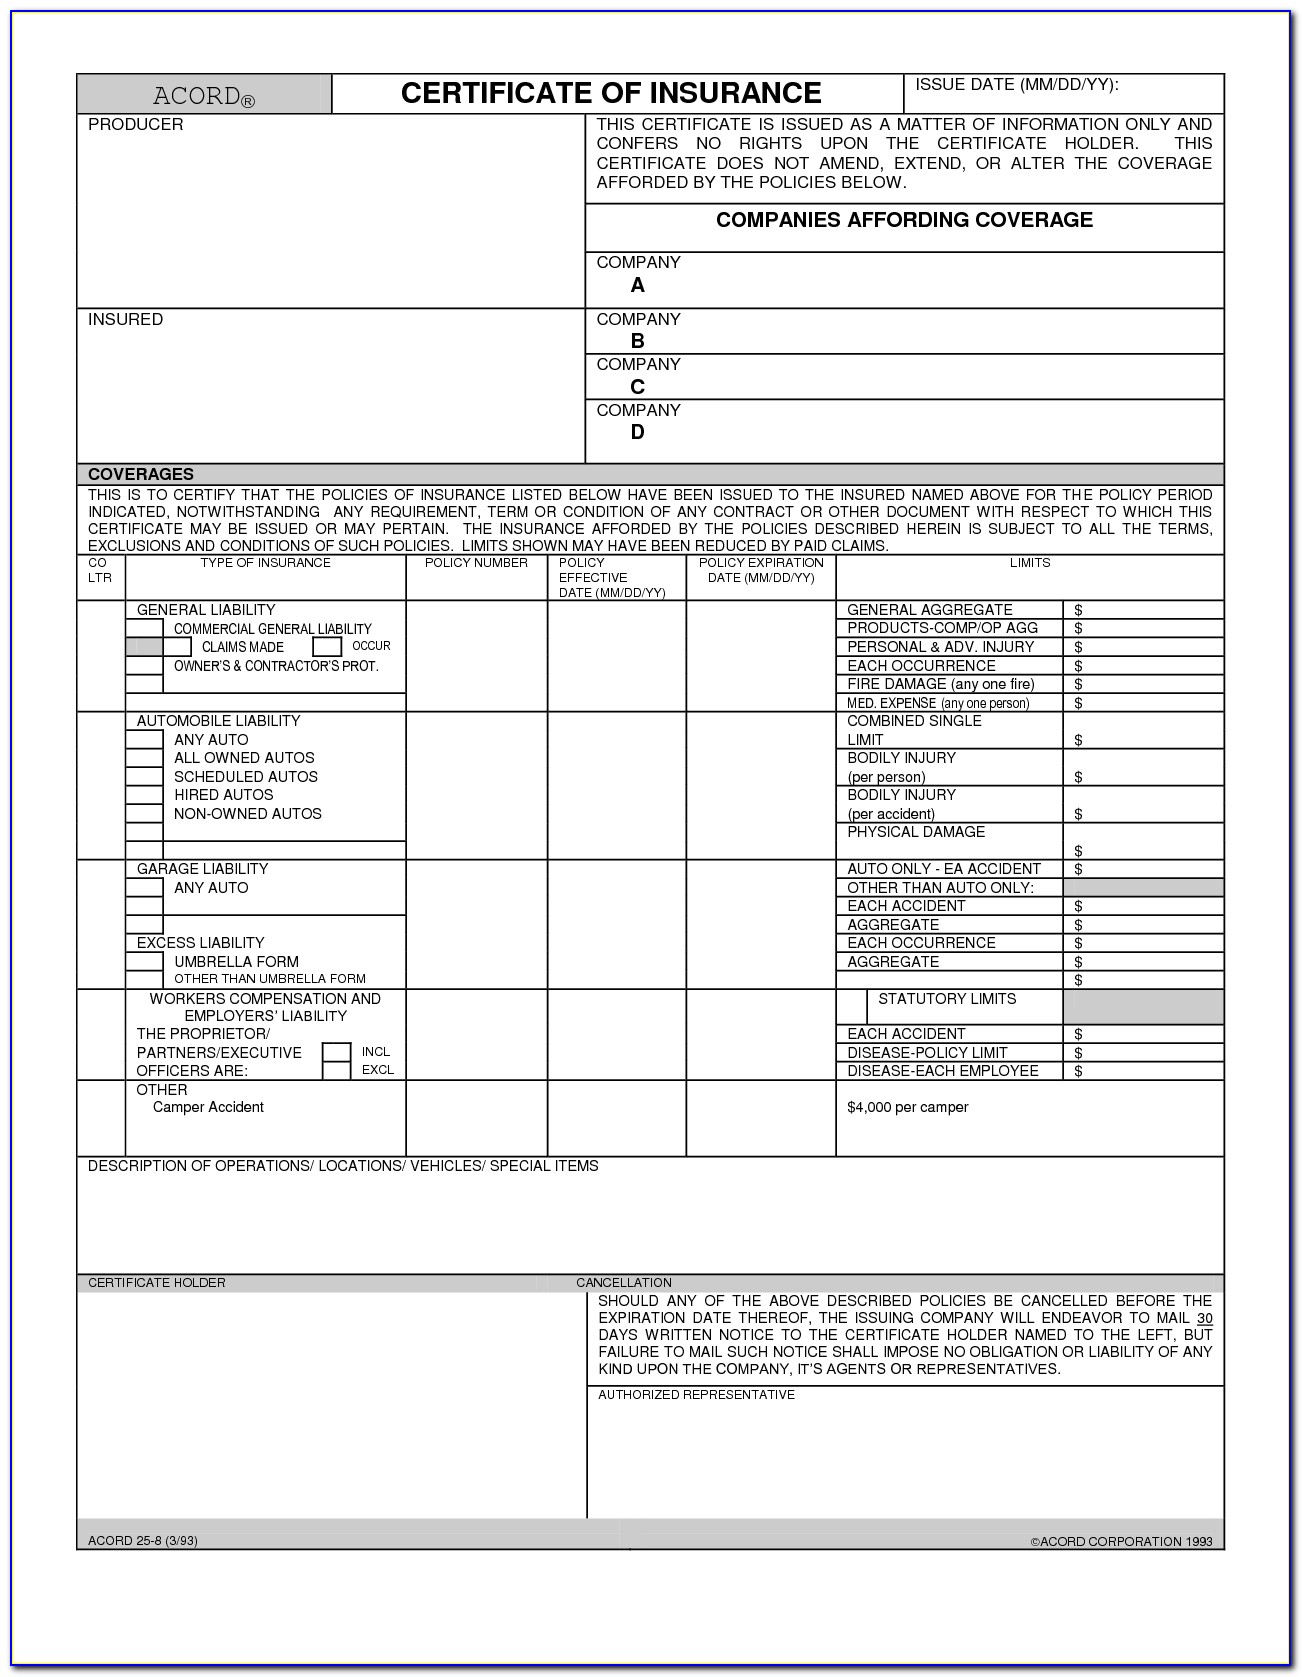 Certificate Of Insurance Acord Form 25